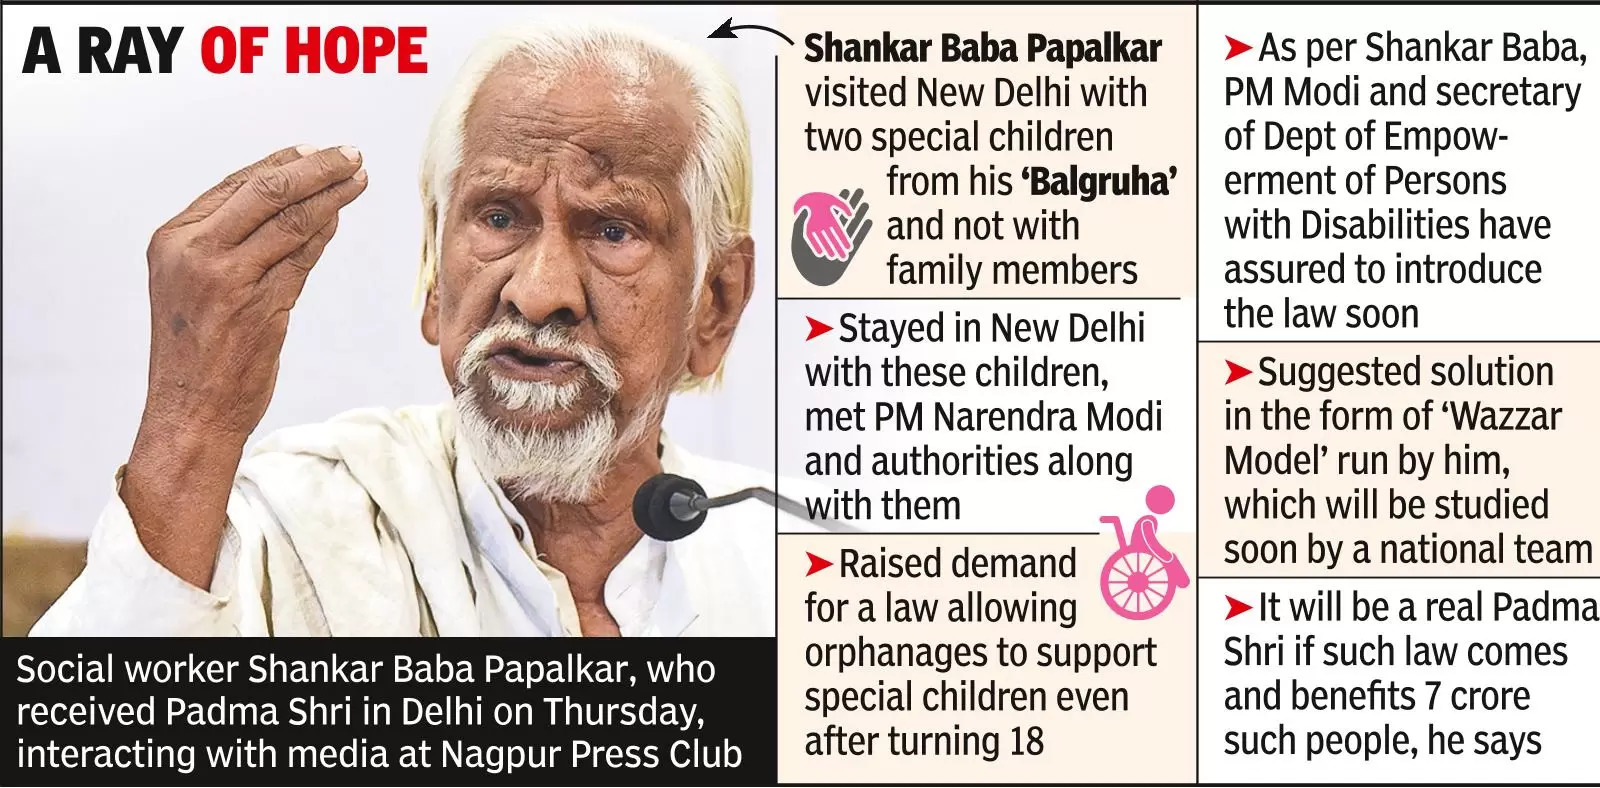 Centre mulling law to ensure shelter even for adult orphans with disabilities: Shankar Baba